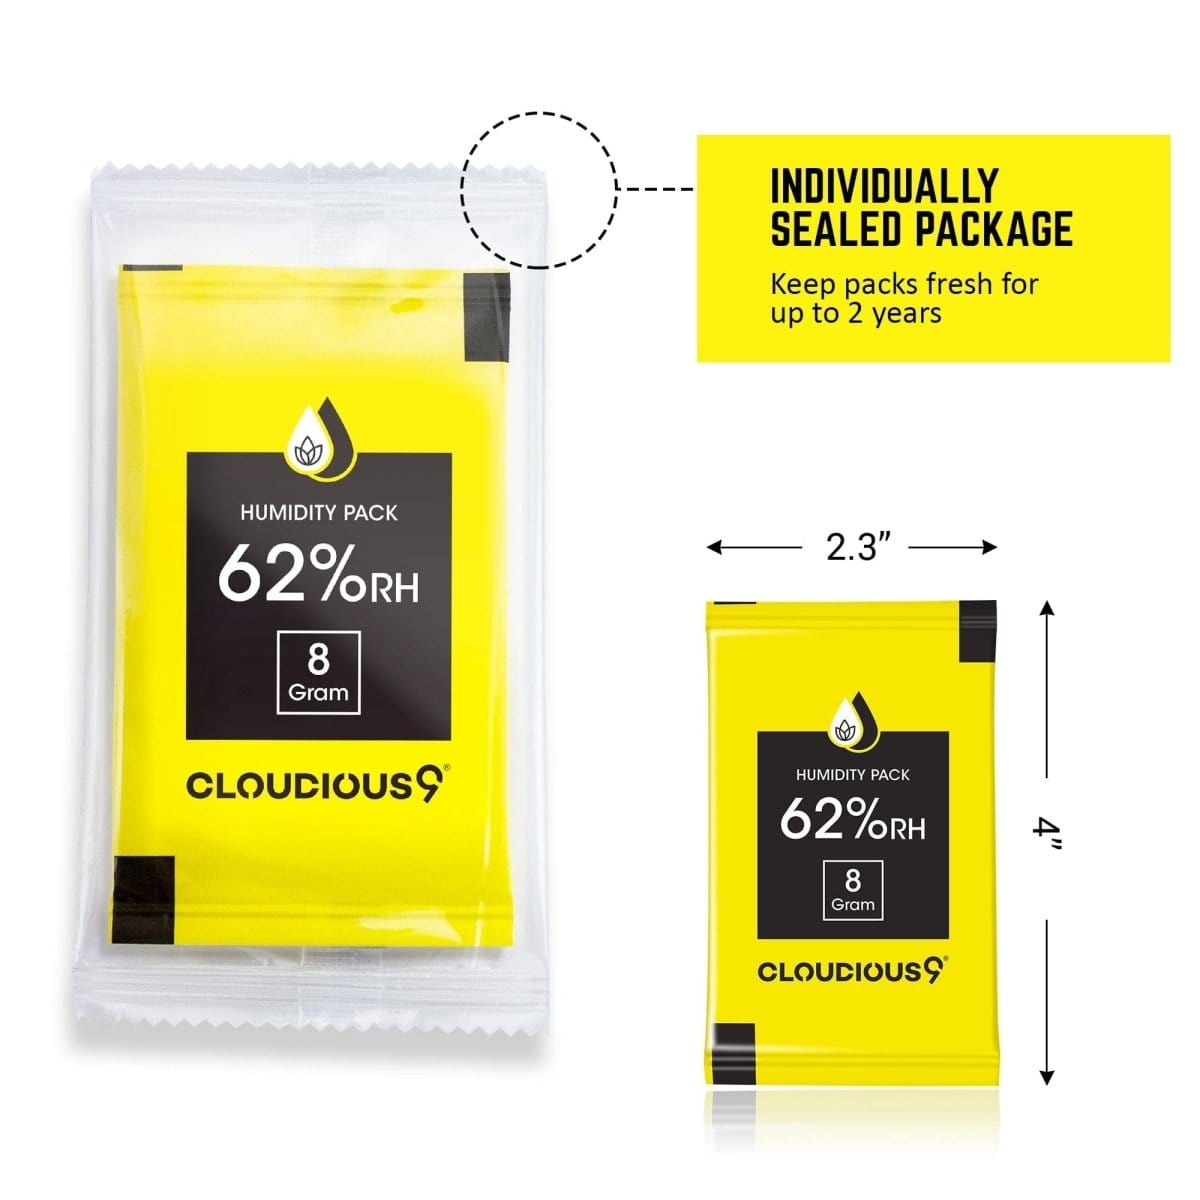 Cloudious9 Container Cloudious9 62% 2-Way Humidity Pack Regulator - 12 Count